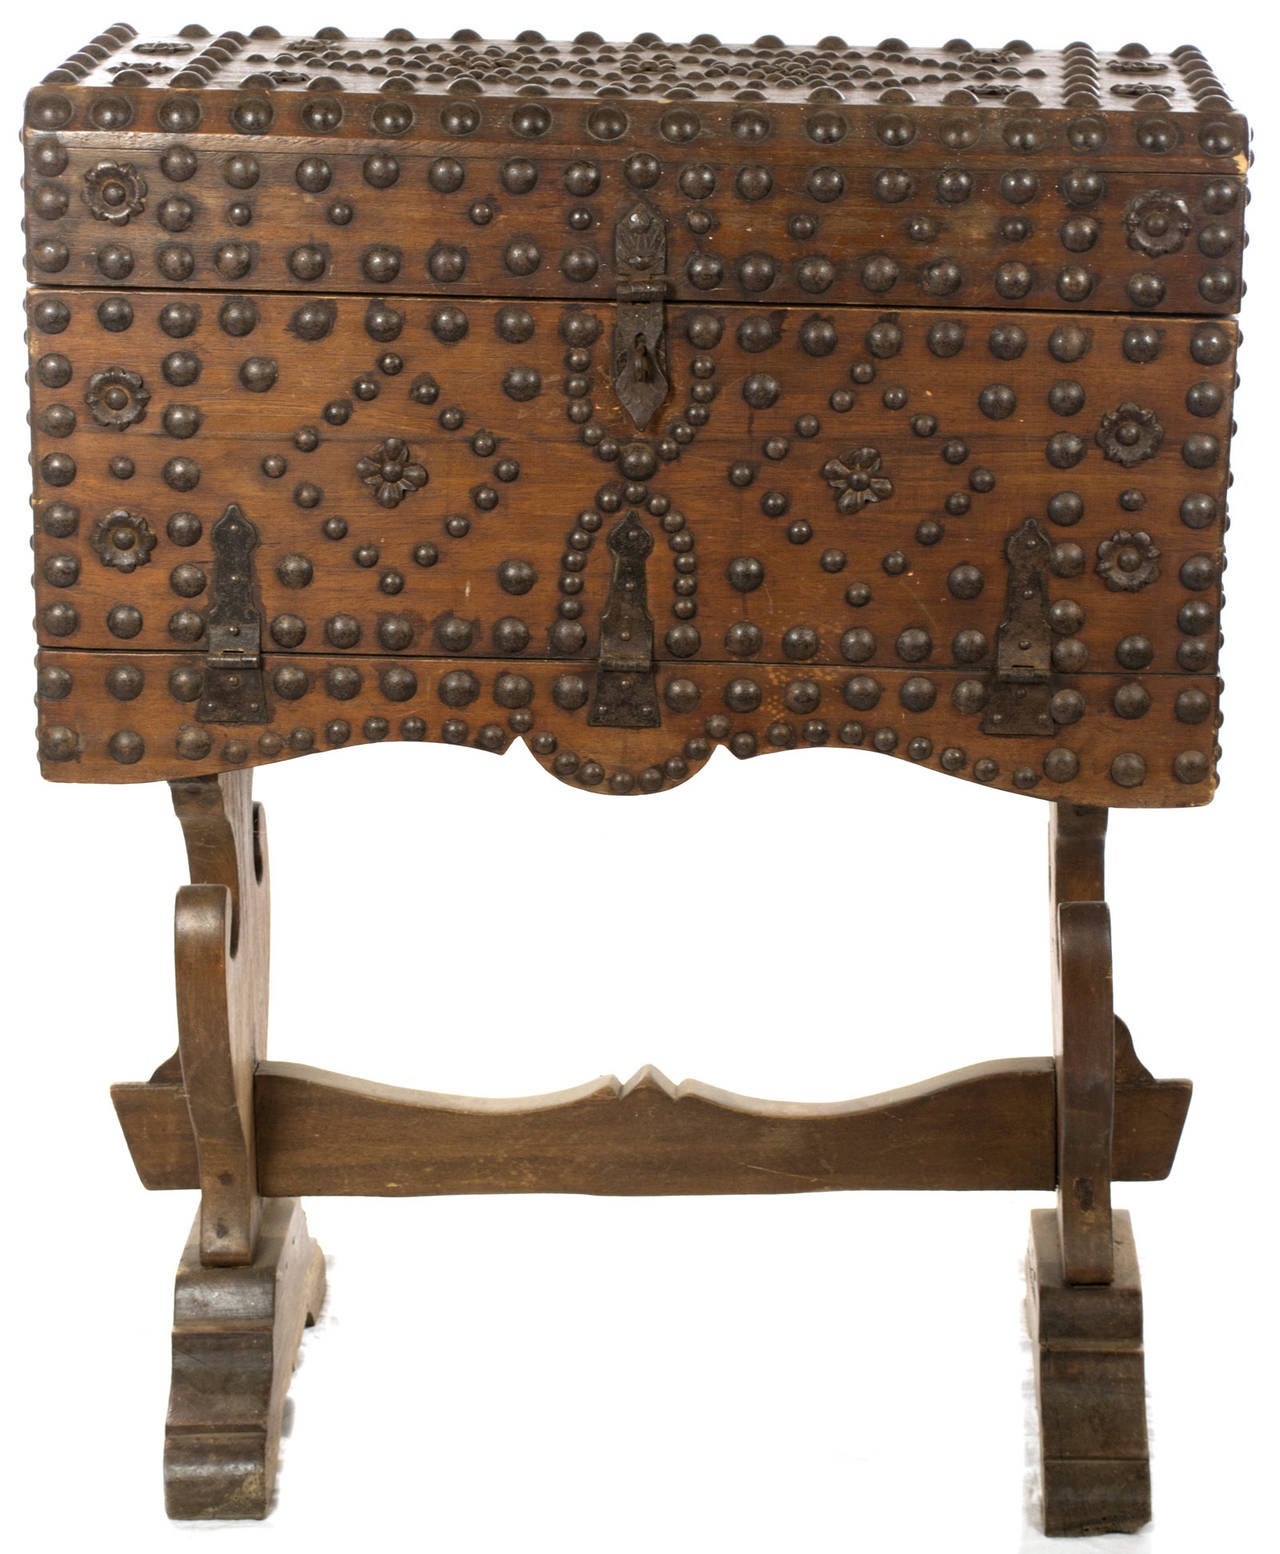 An Iberian oak box on matching stand inlaid with dozens of iron studs in geometric, Hispano-Moresque patterns. The chest opens upwards to reveal large, iron-lined compartment.